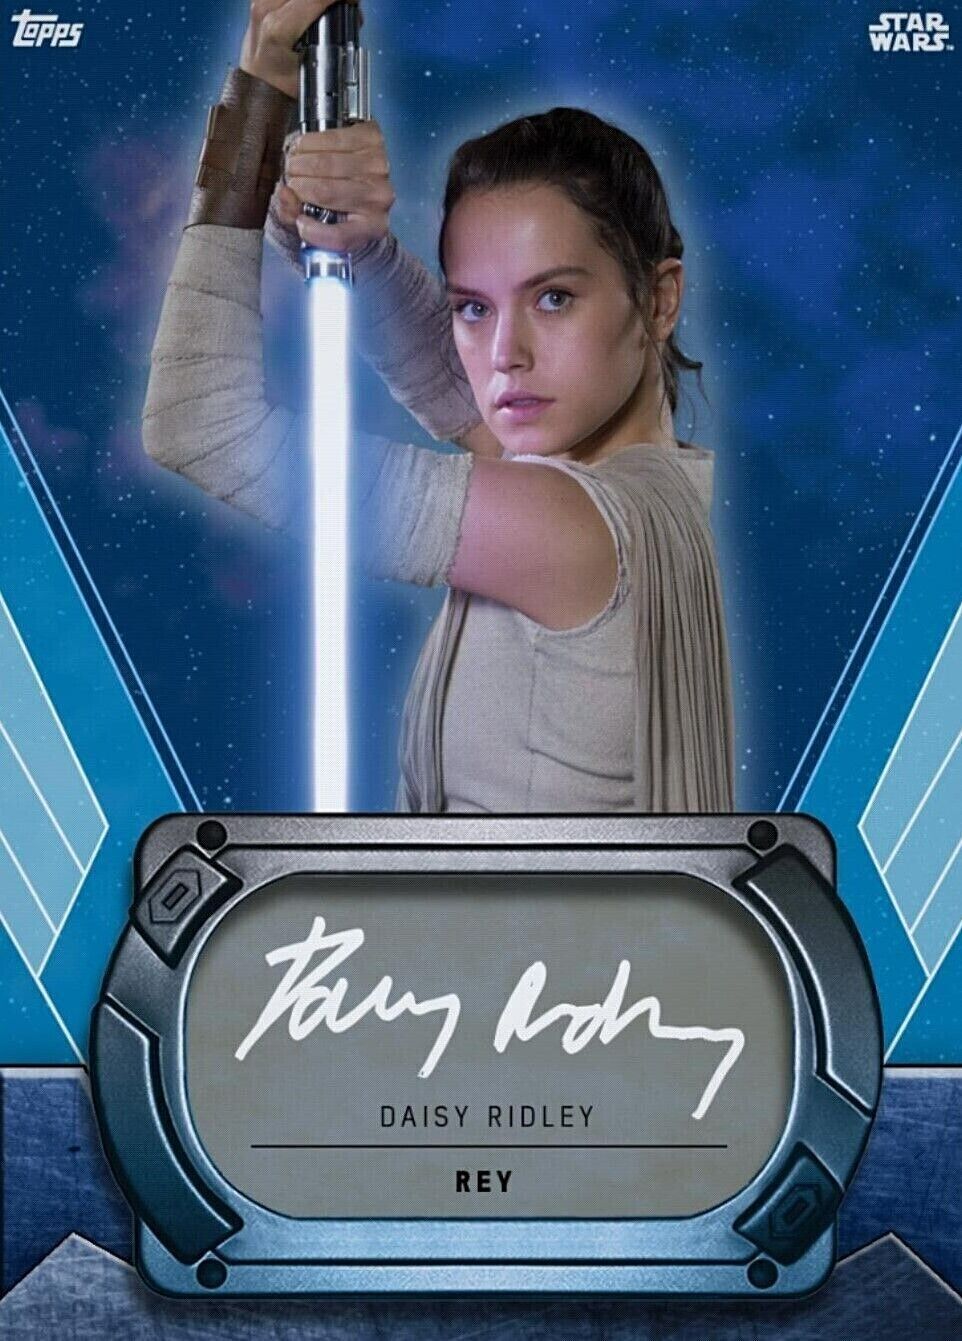 Topps Star Wars Rare DAISY RIDLEY Authentic Autograph as REY SIG Digital Card